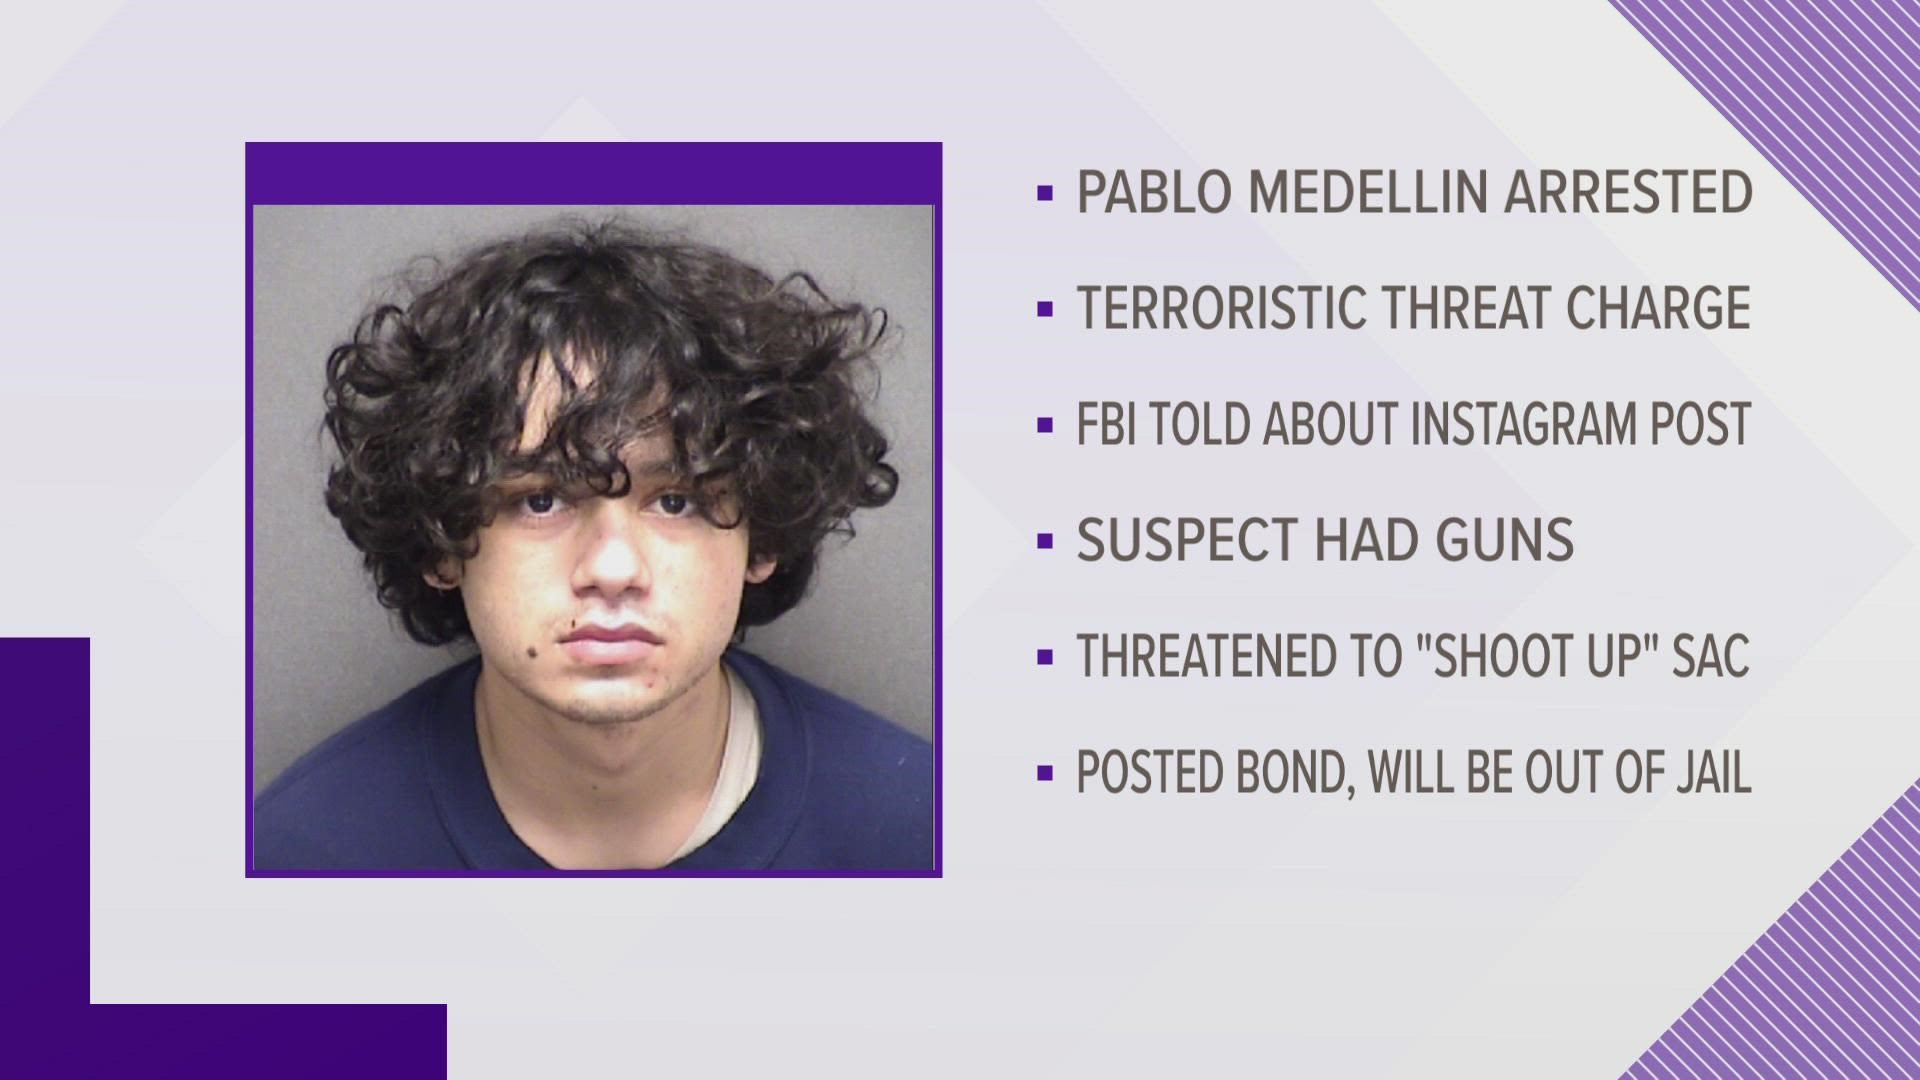 The 20-year-old suspect allegedly posed with handguns in online posts where he was threatening to shoot up the campus.